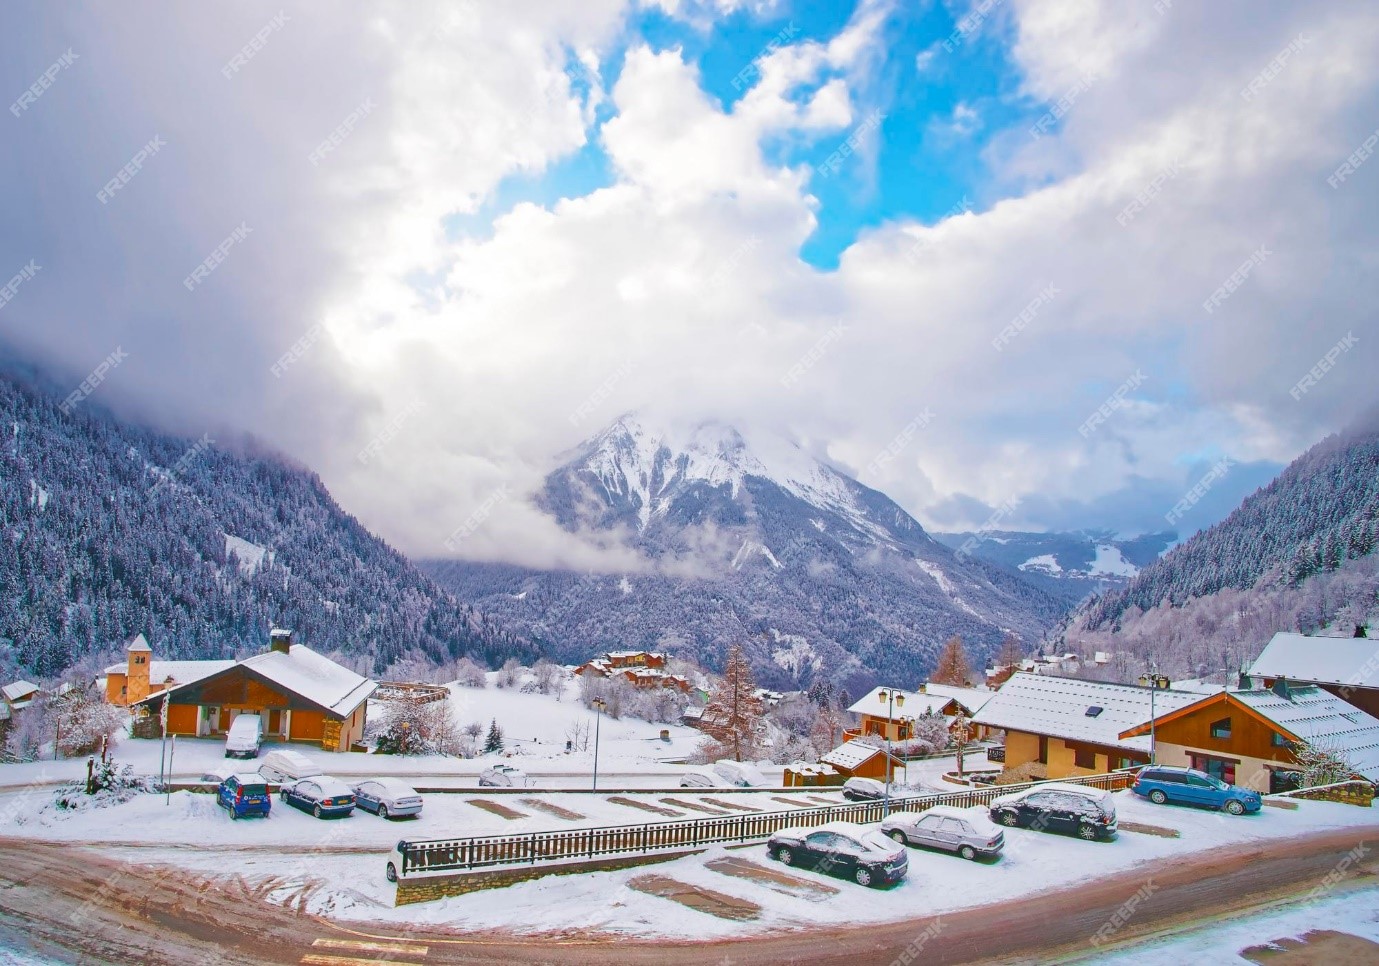 Dream Holiday Destination for this winter â French Alps - Blog Guru